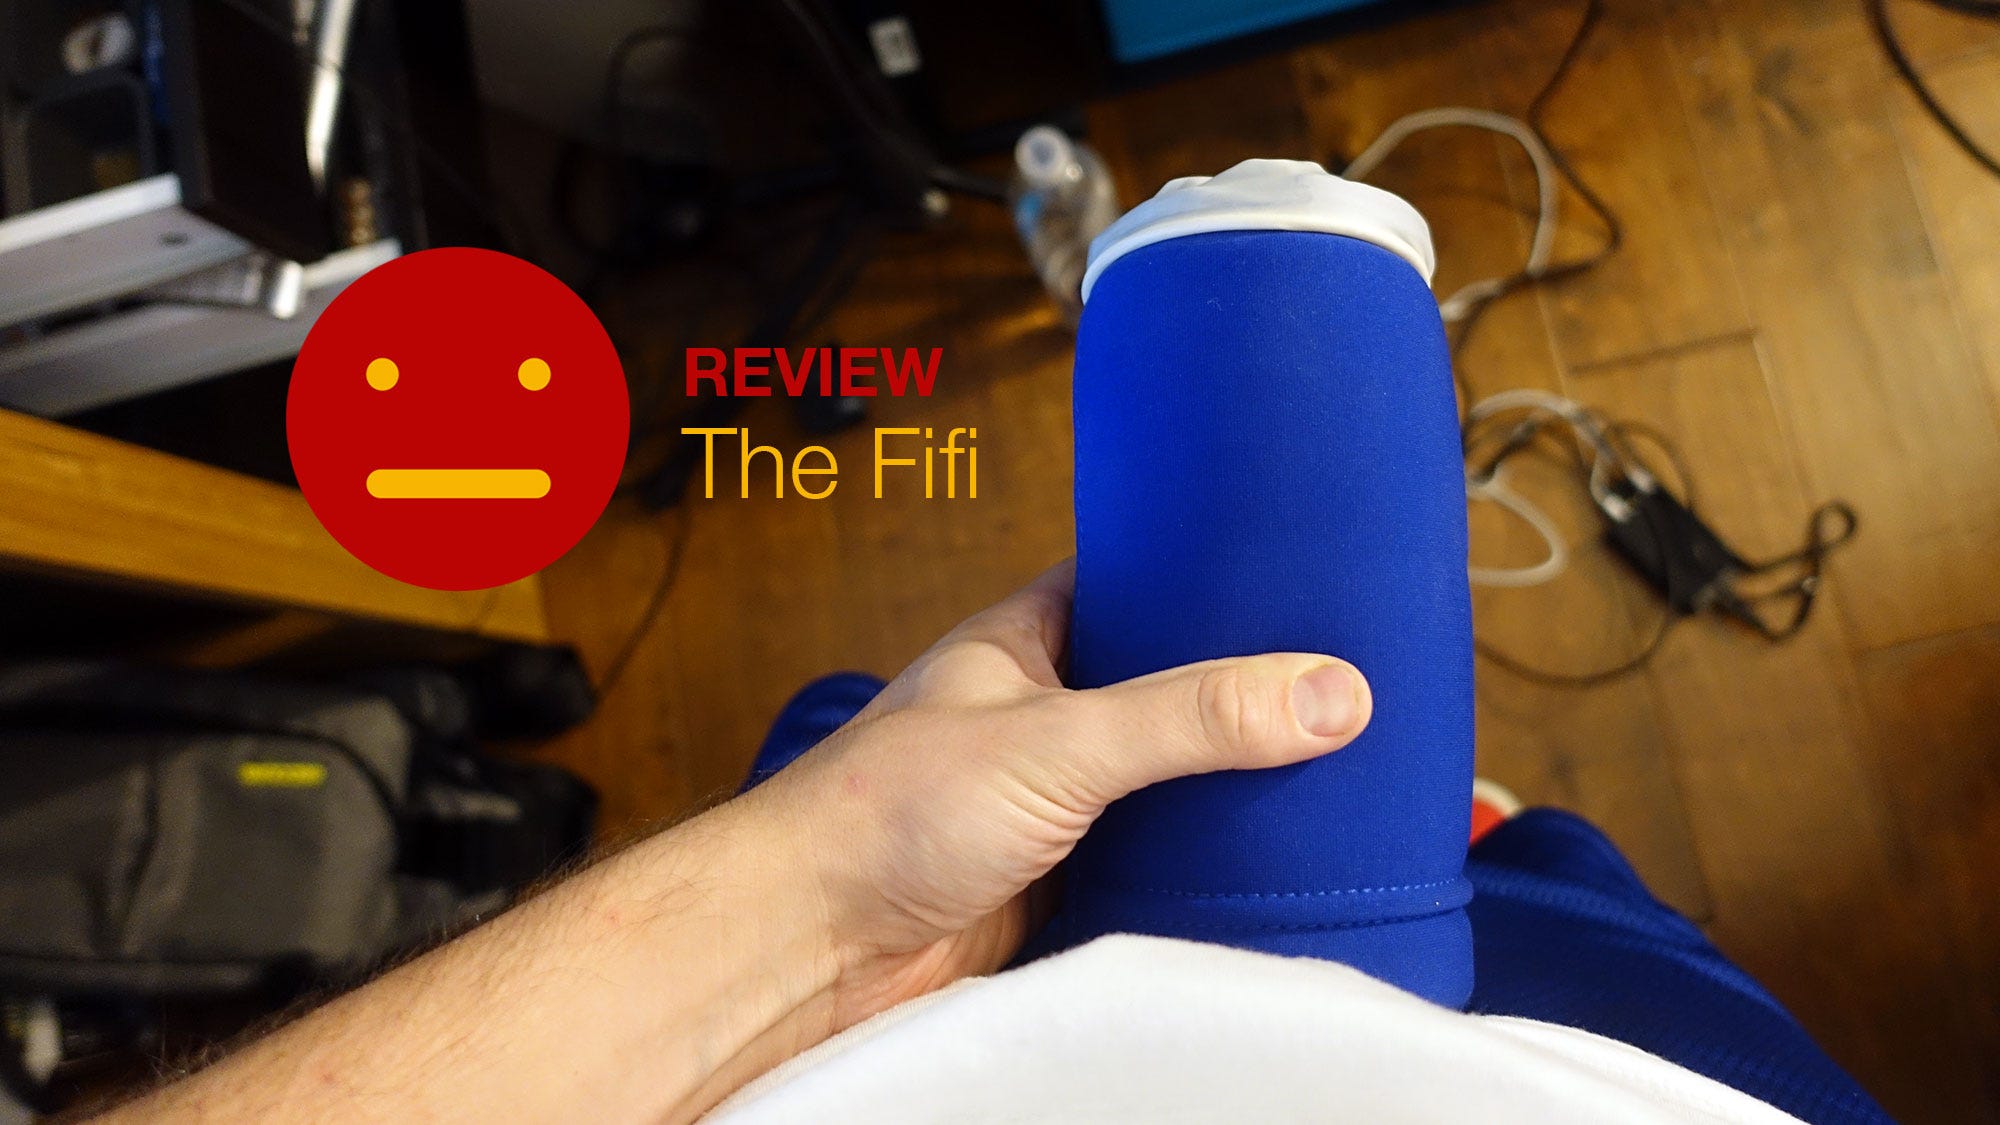 Review The Fifi Male Pleasure Device by Adam Dachis Awkward Human image picture